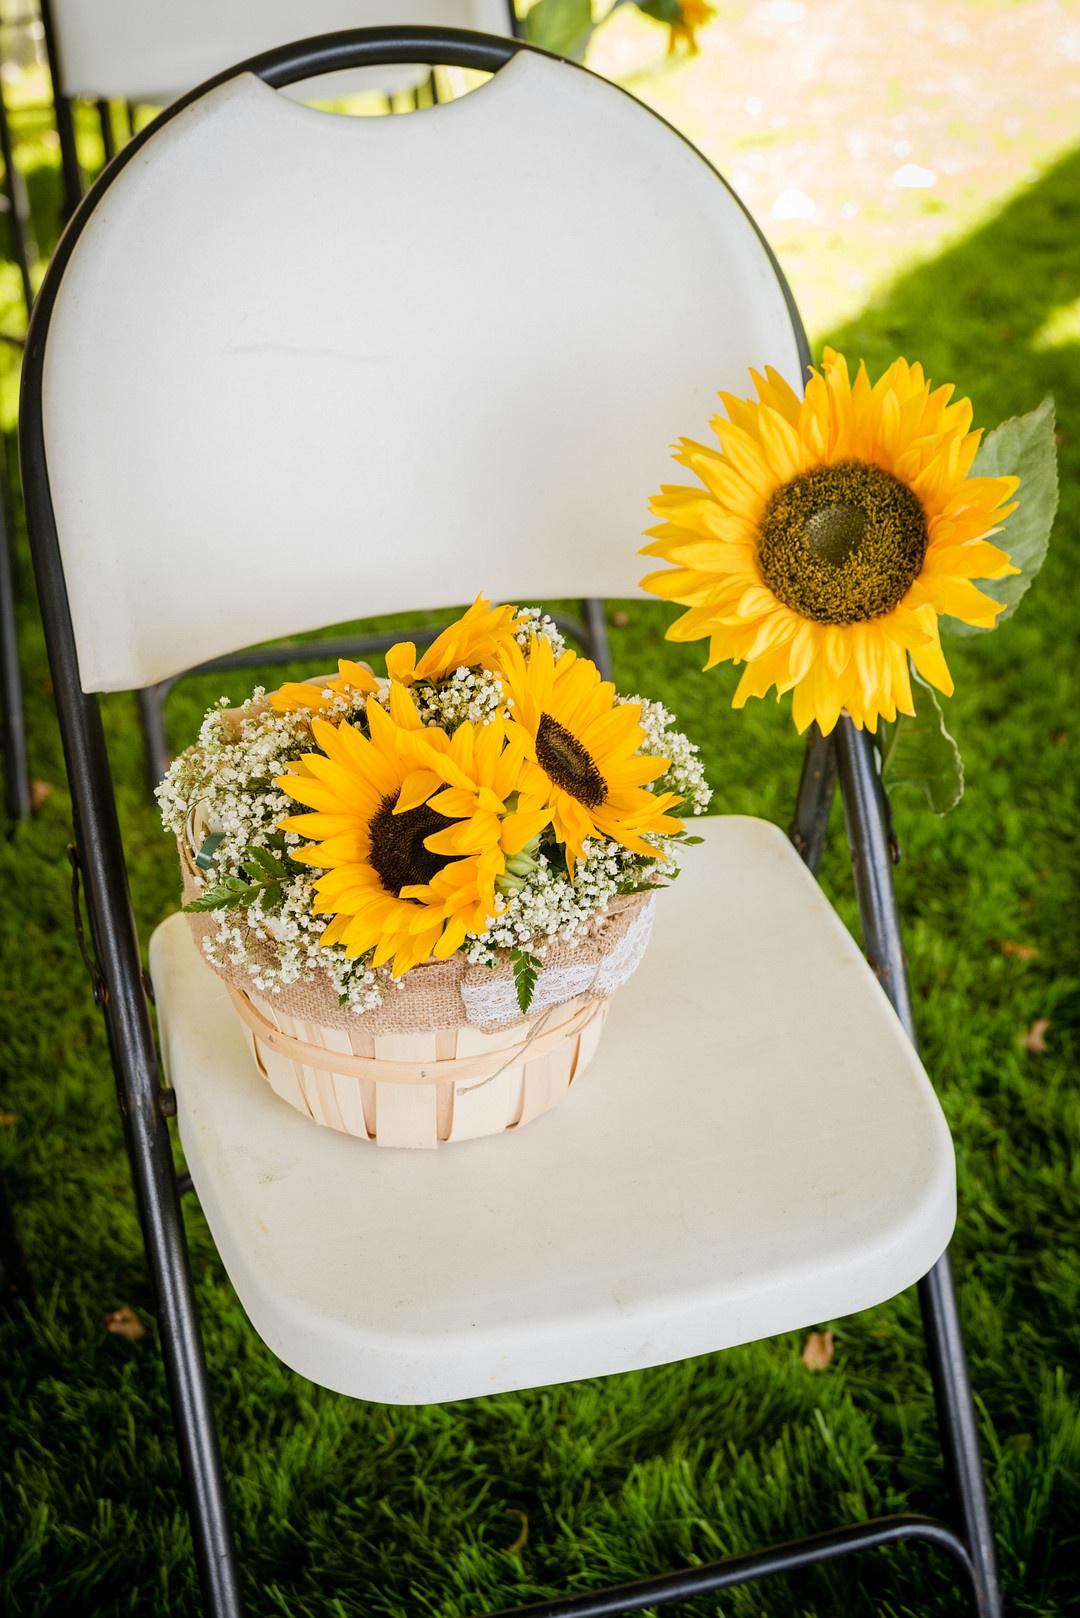 folding chair on grass at outdoor wedding ceremony with a basket of yellow sunflowers and baby's breath